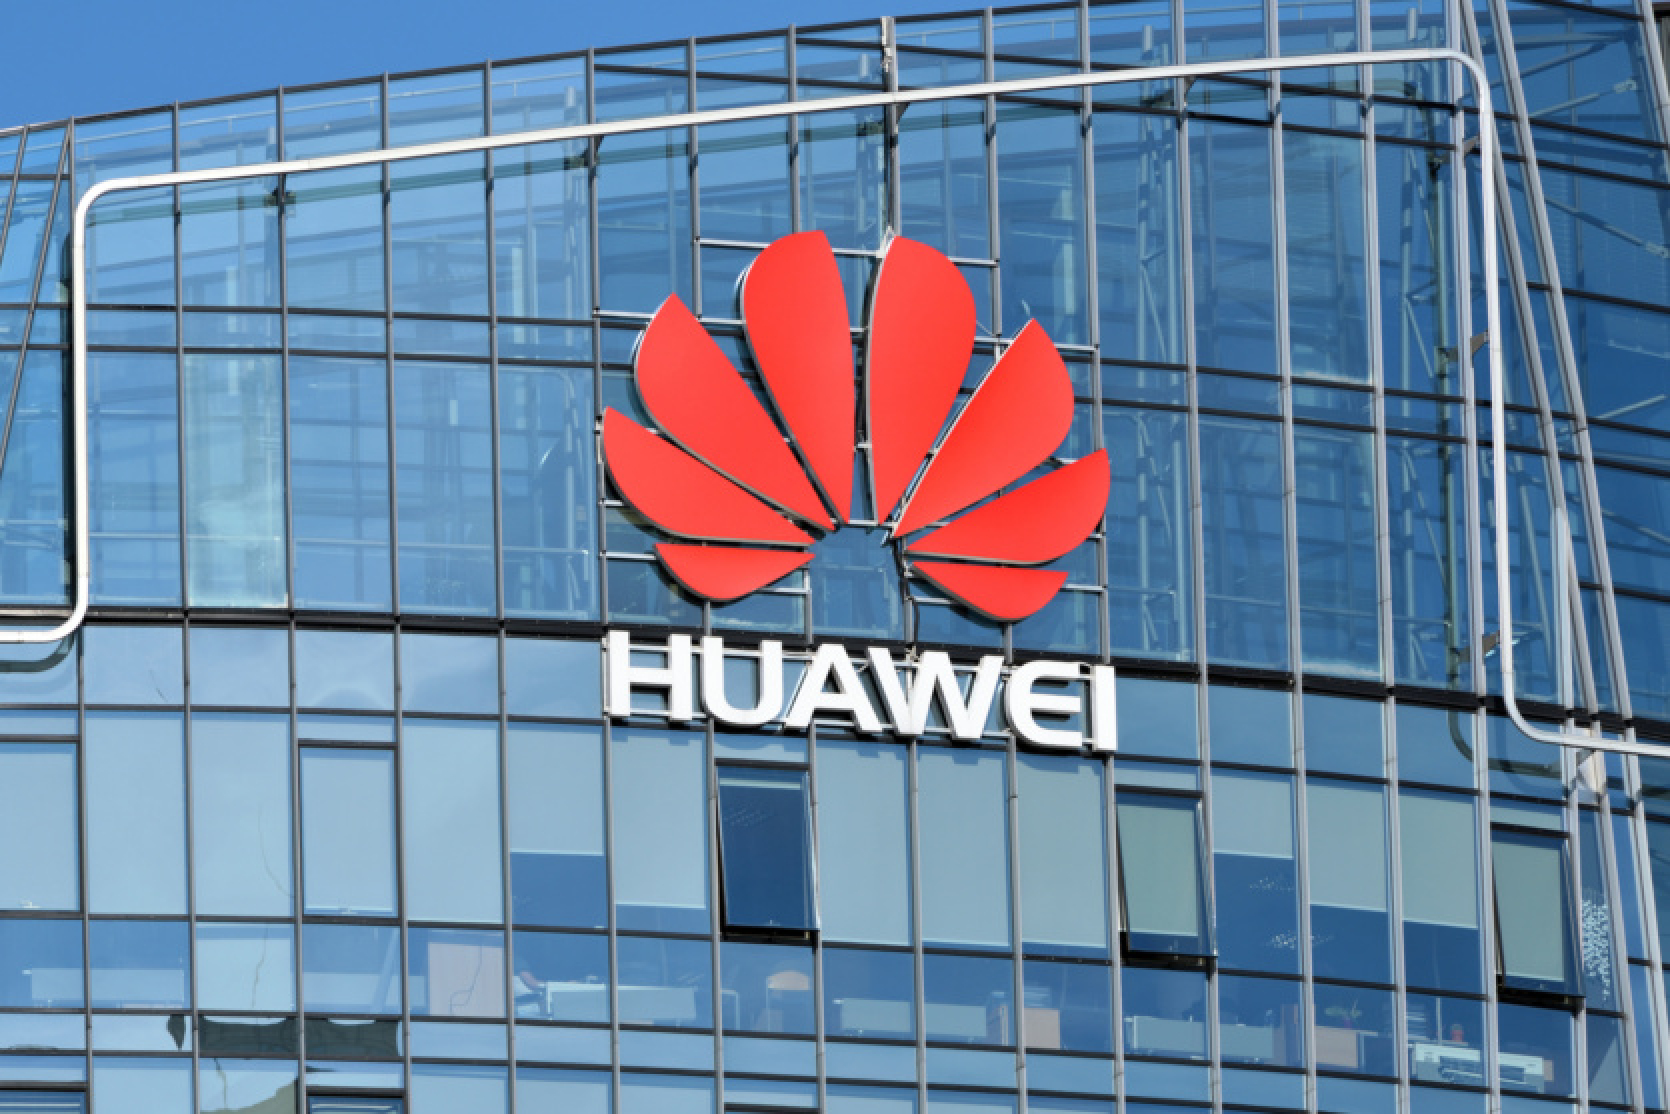 Huawei generated $97.48 billion in revenue and $12.05 billion in profit - business recovers from 2019 U.S. sanctions